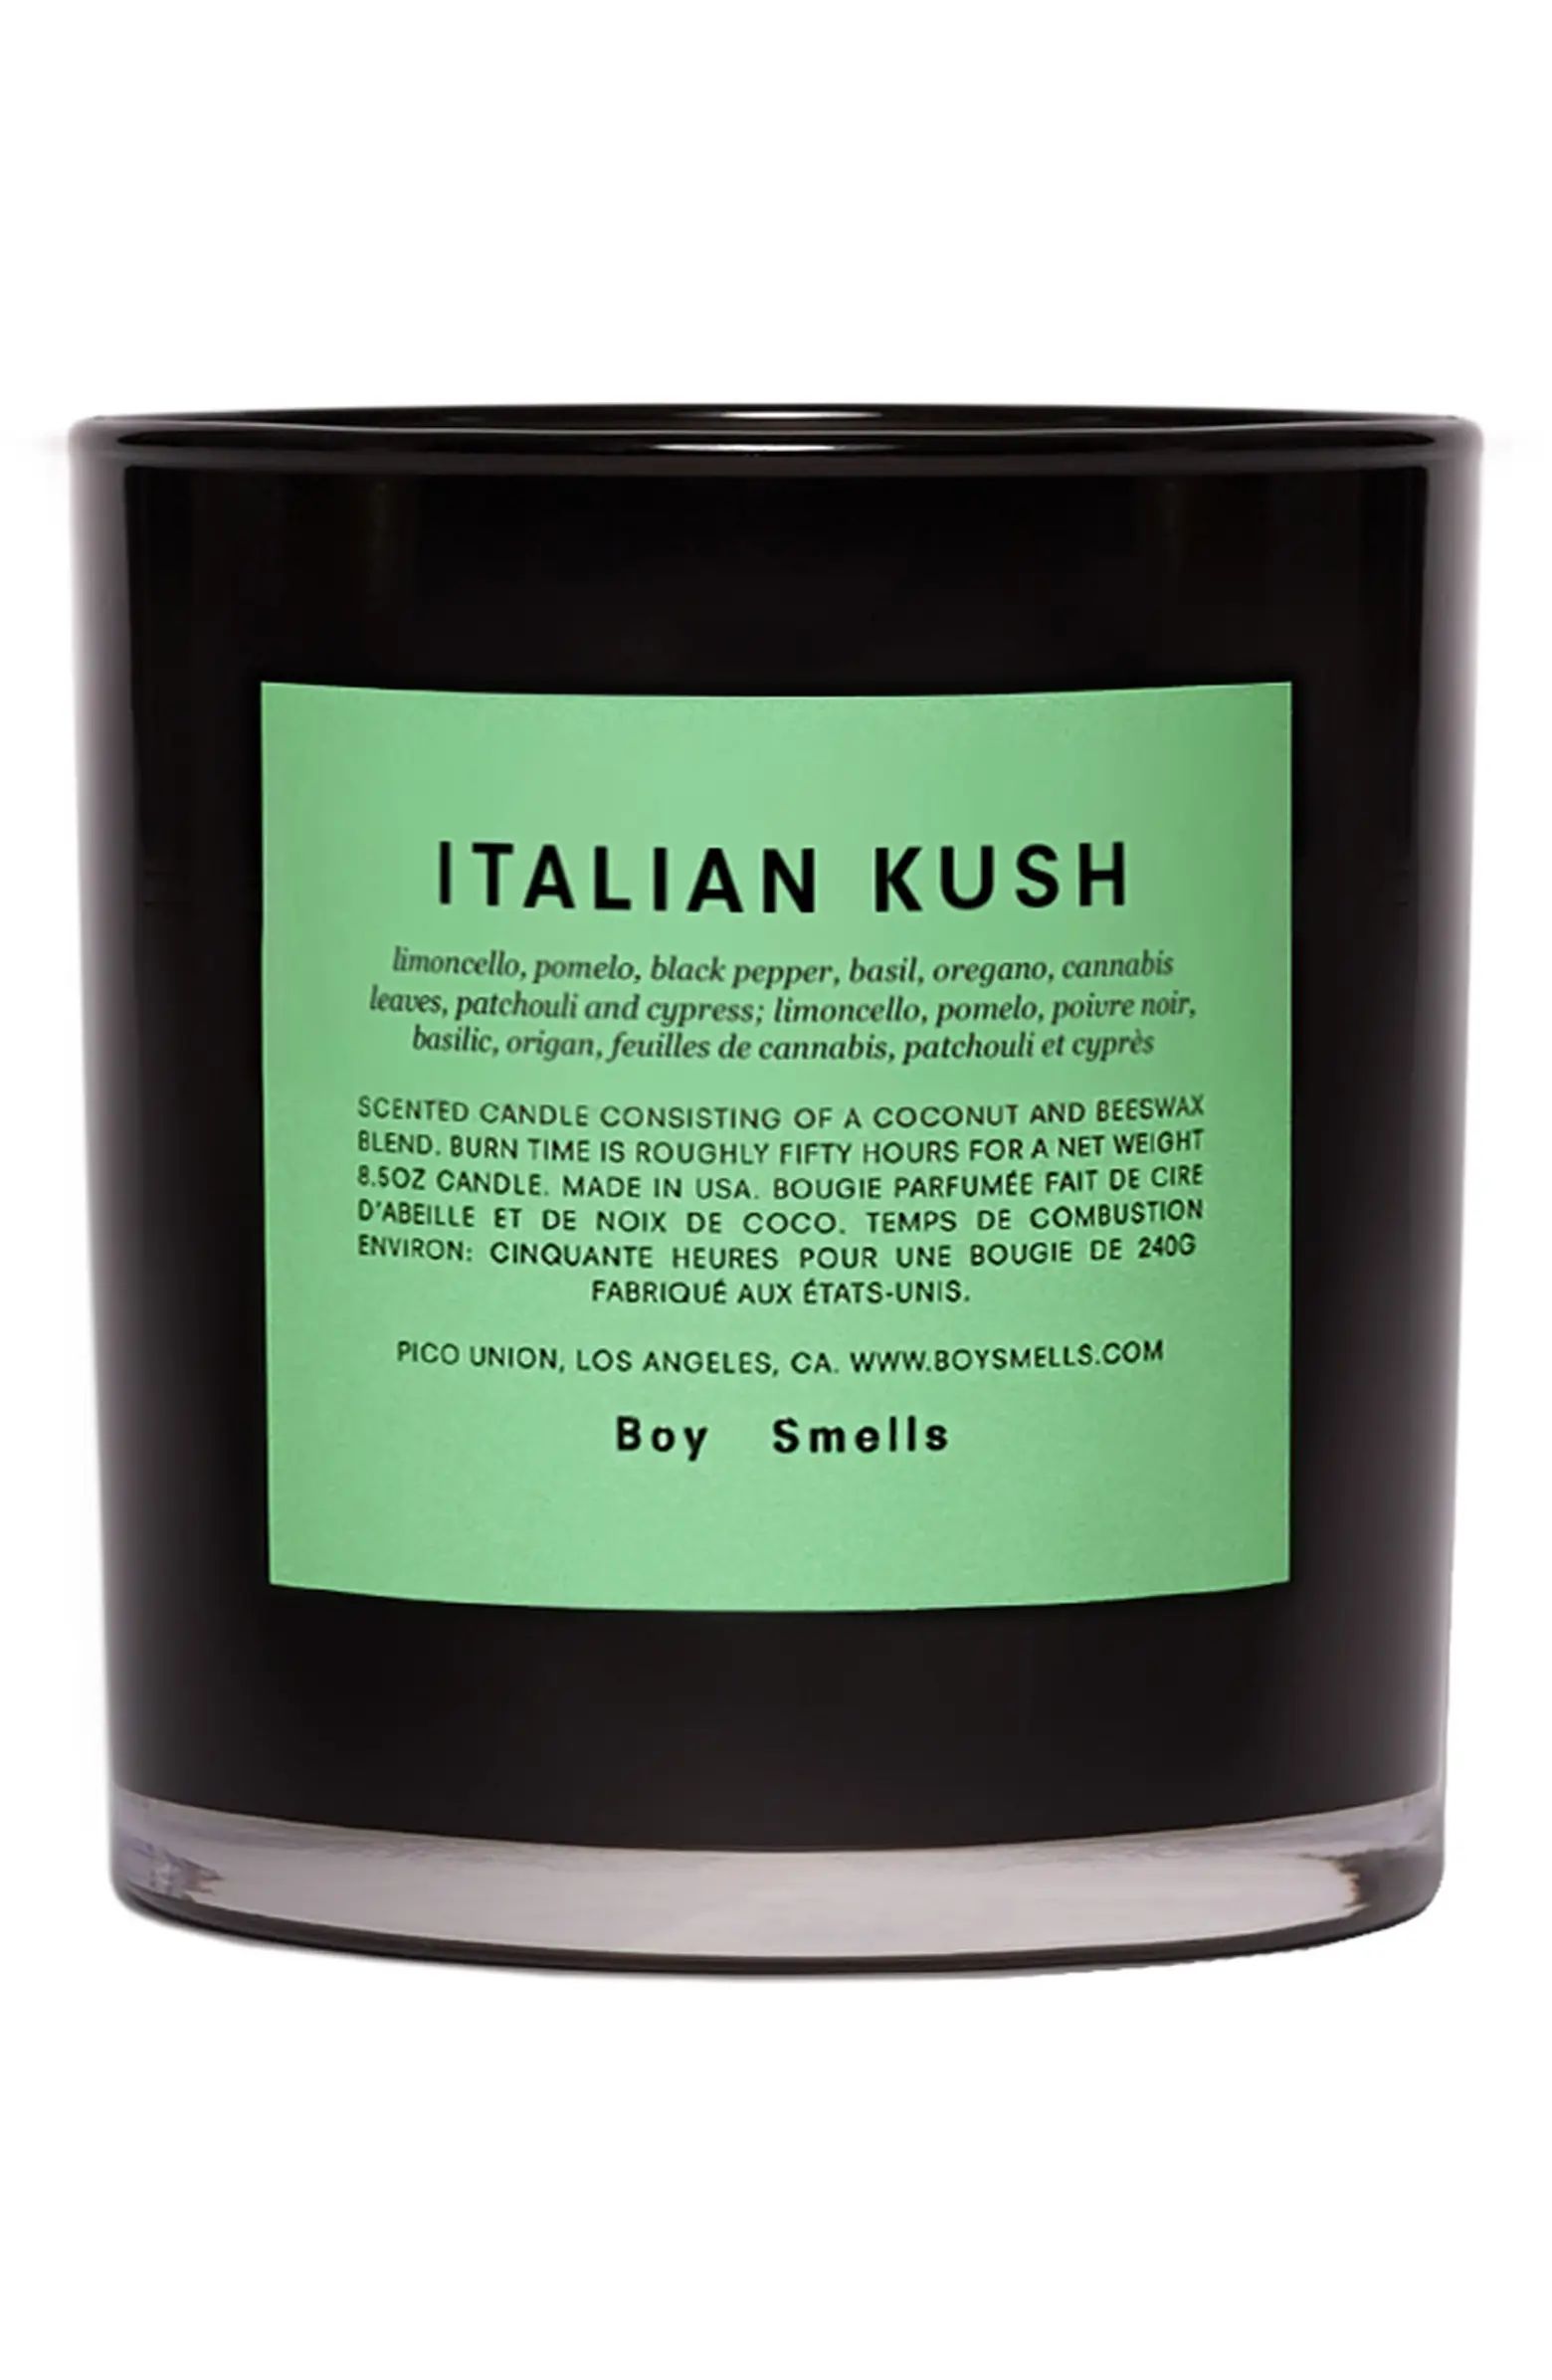 Italian Kush Scented Candle | Nordstrom